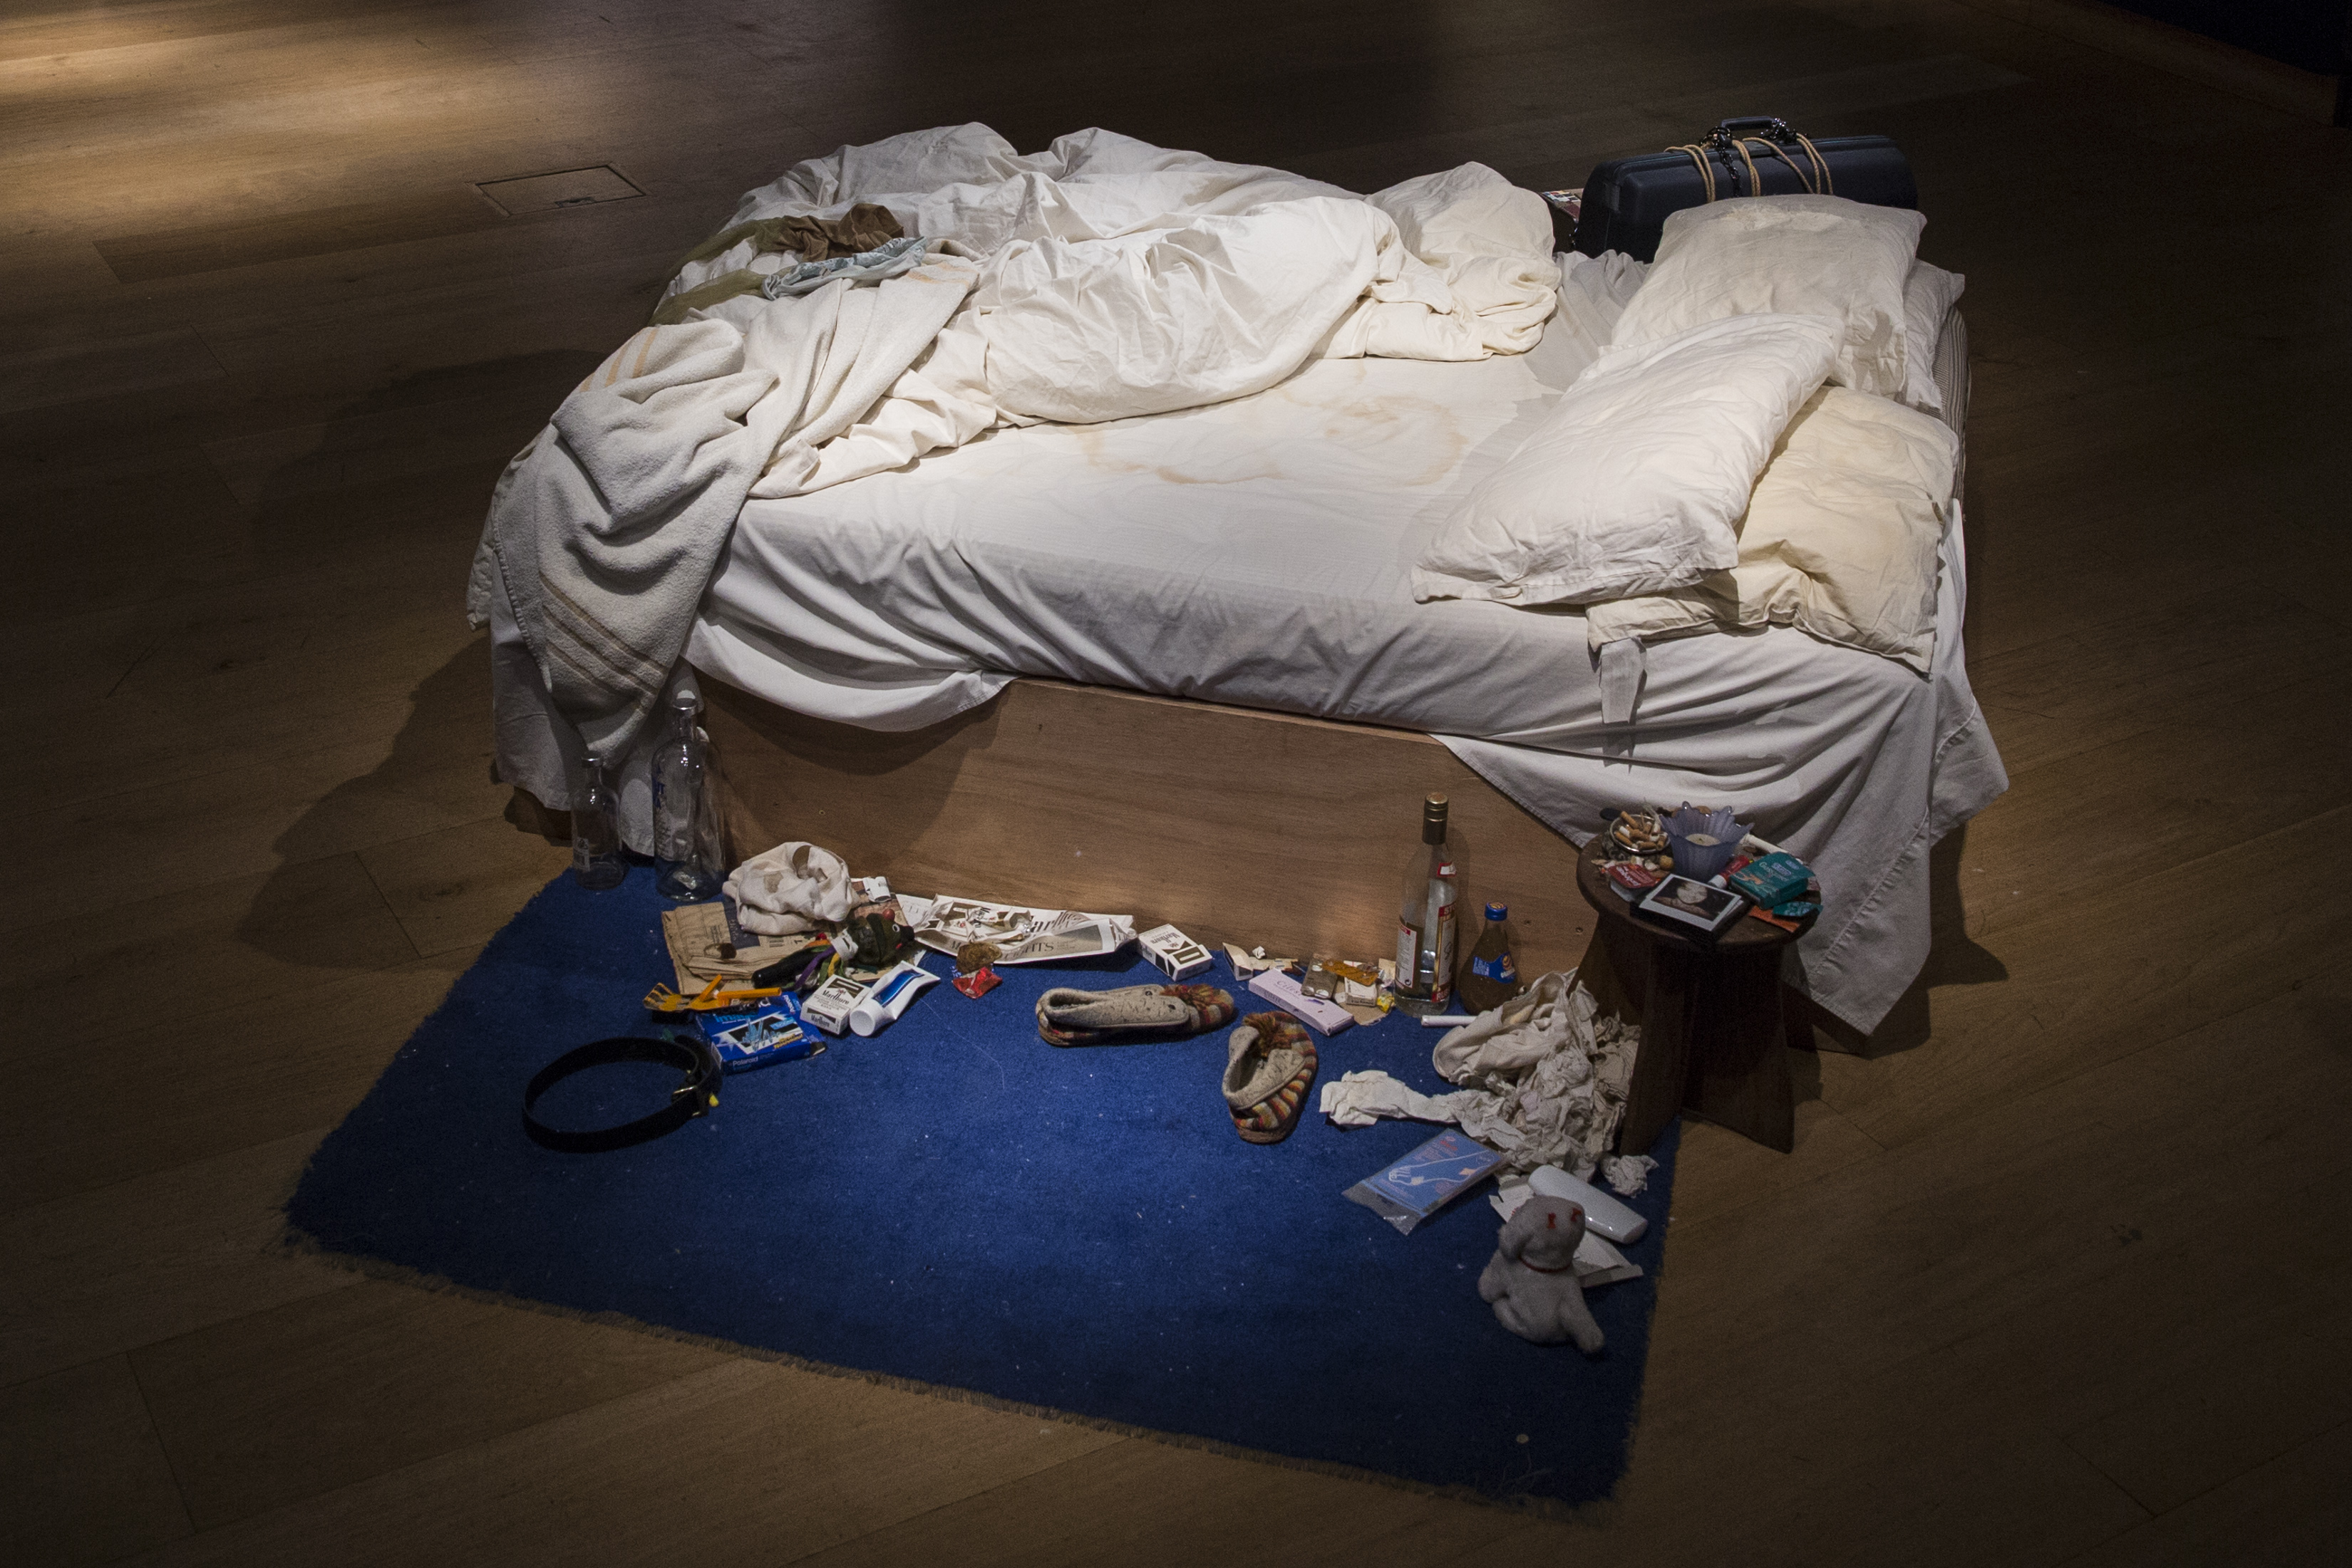 Tracy Emin's 1998 piece <i>My Bed</i> on display at Christie's in London on June 27, 2014 (Rob Stothard&amp;mdash;Getty Images)